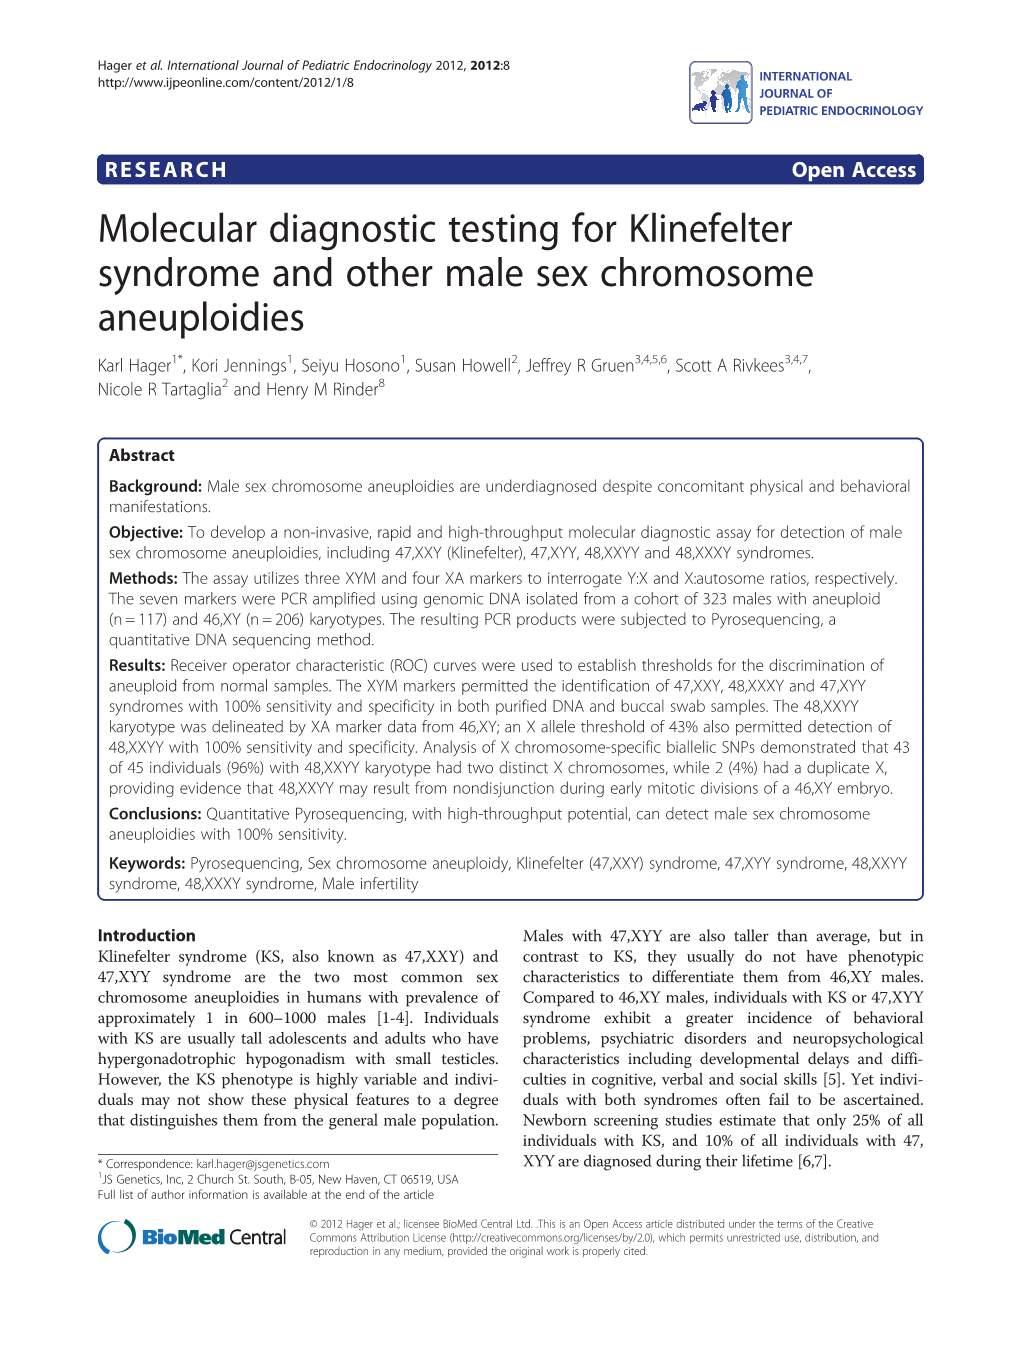 Molecular Diagnostic Testing For Klinefelter Syndrome And Other Male Sex Chromosome Aneuploidies 4951